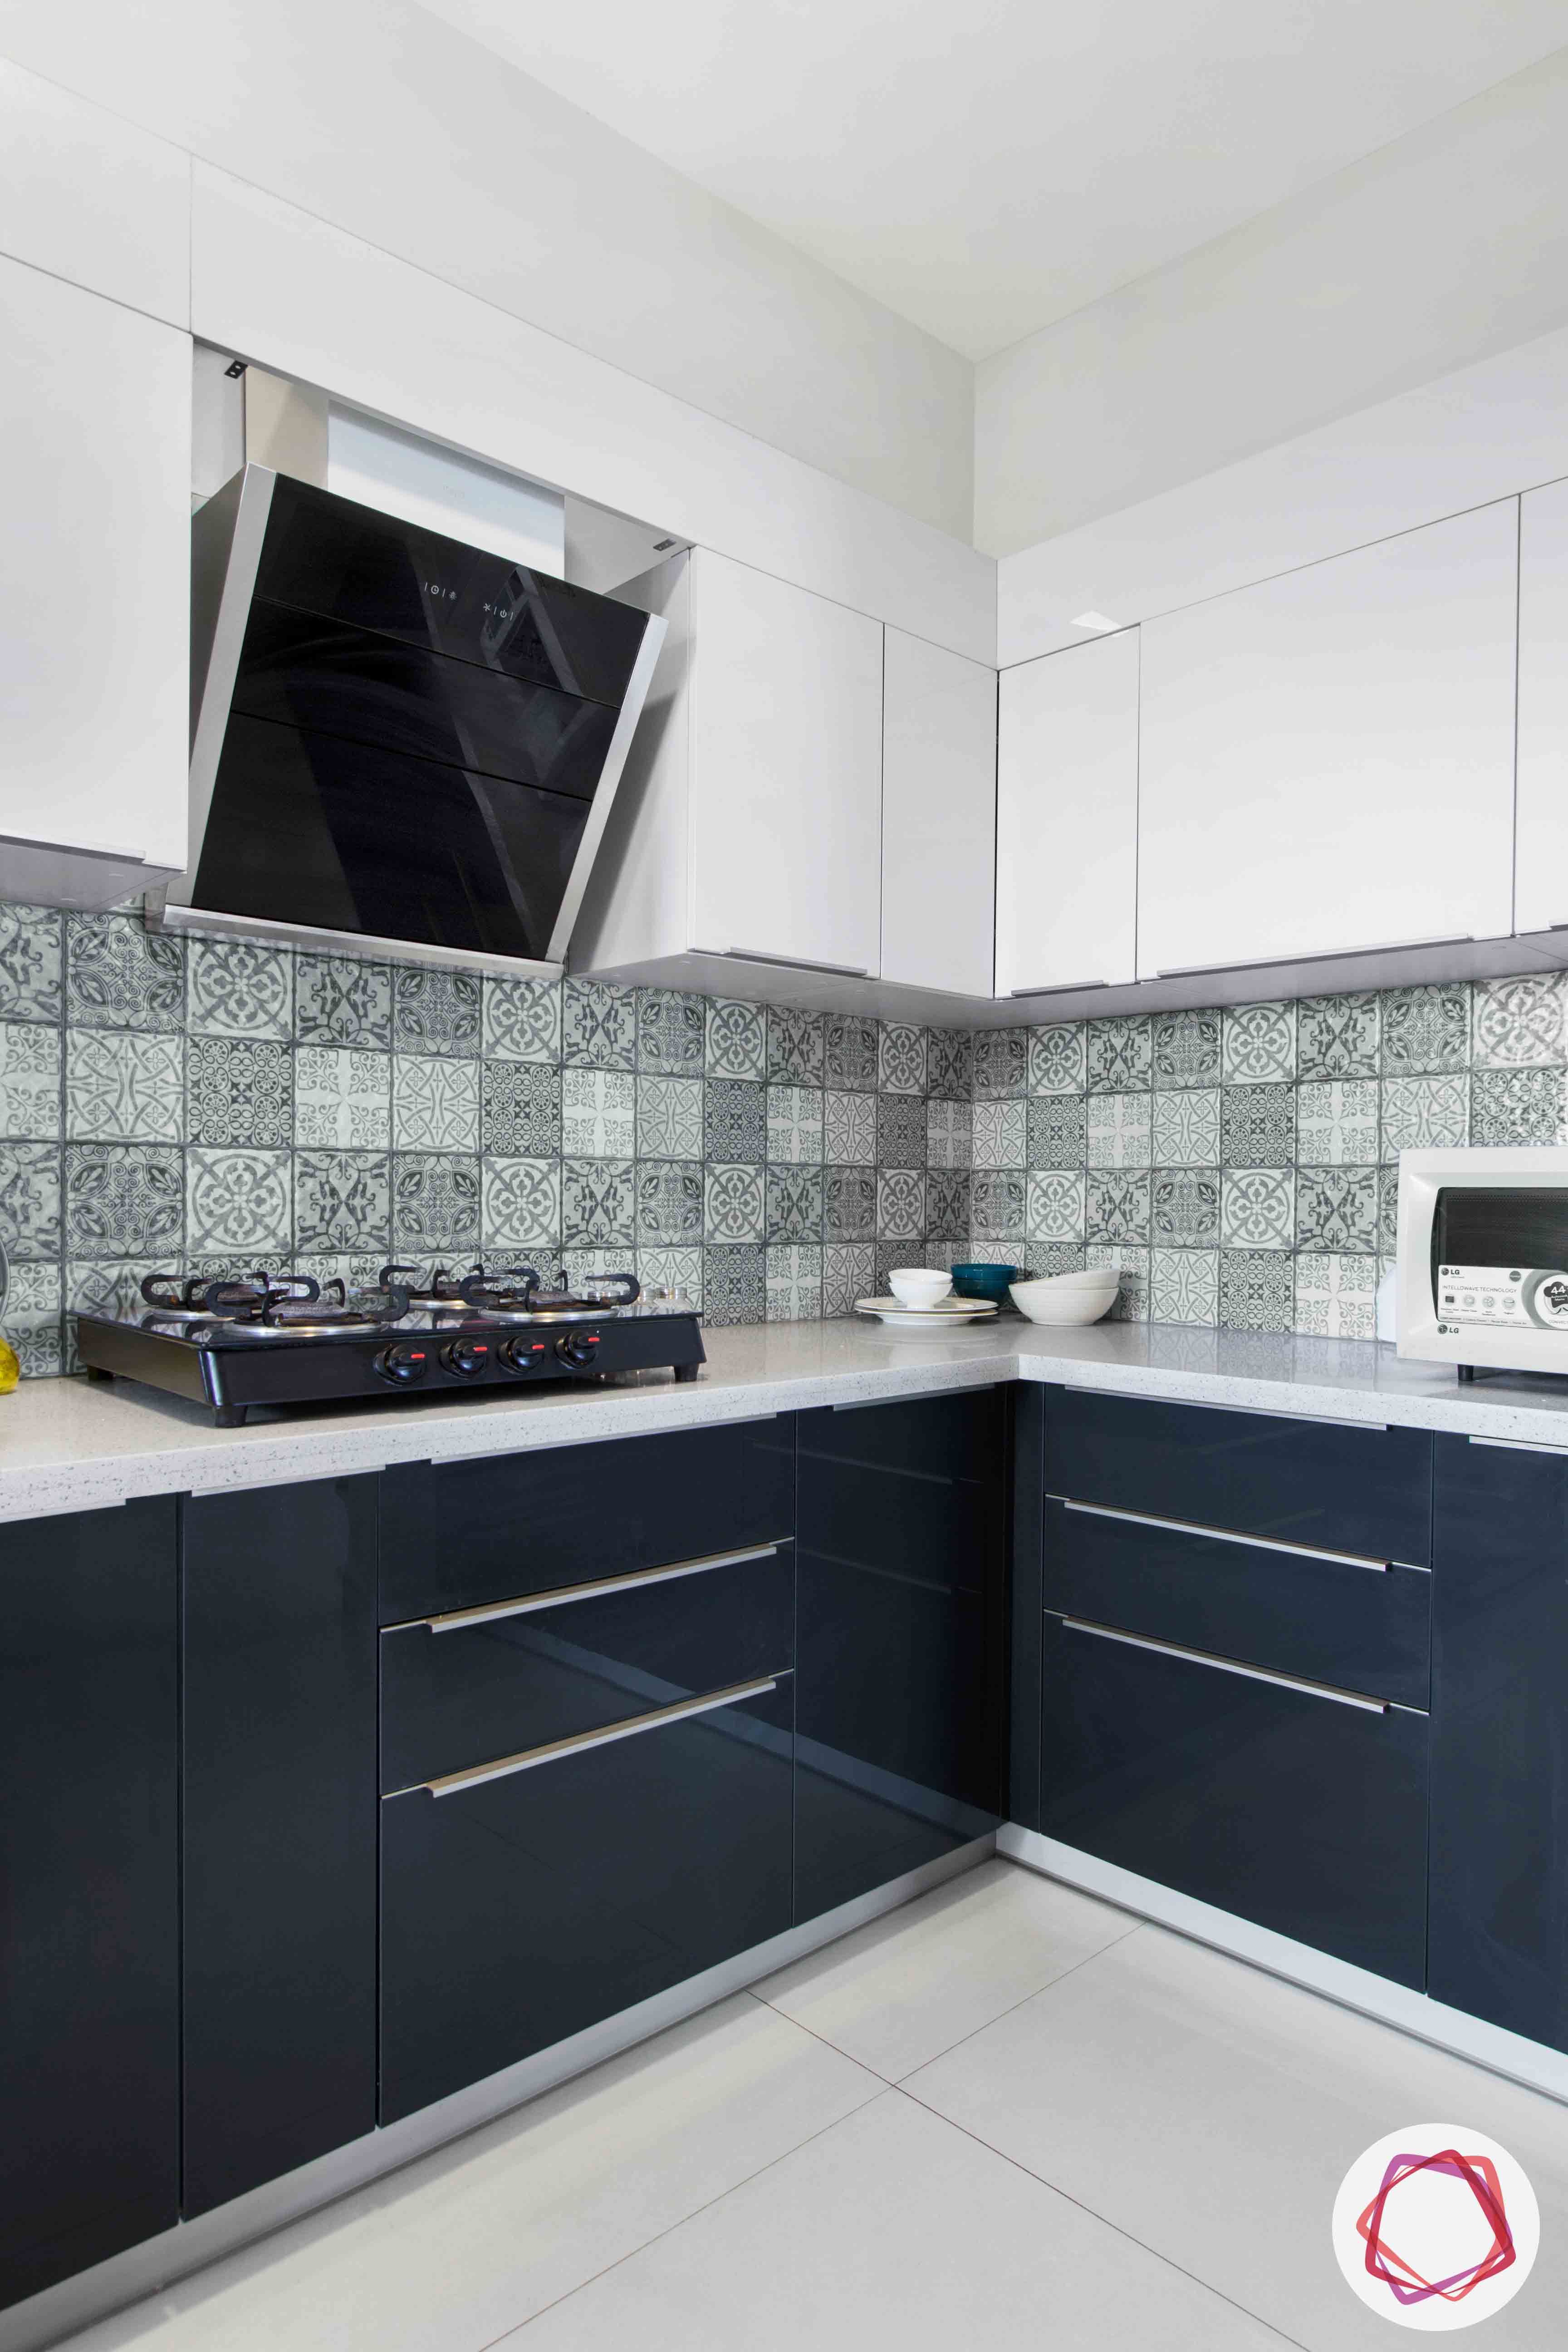 dnr atmosphere-two toned kitchen design-grey and white kitchen designs